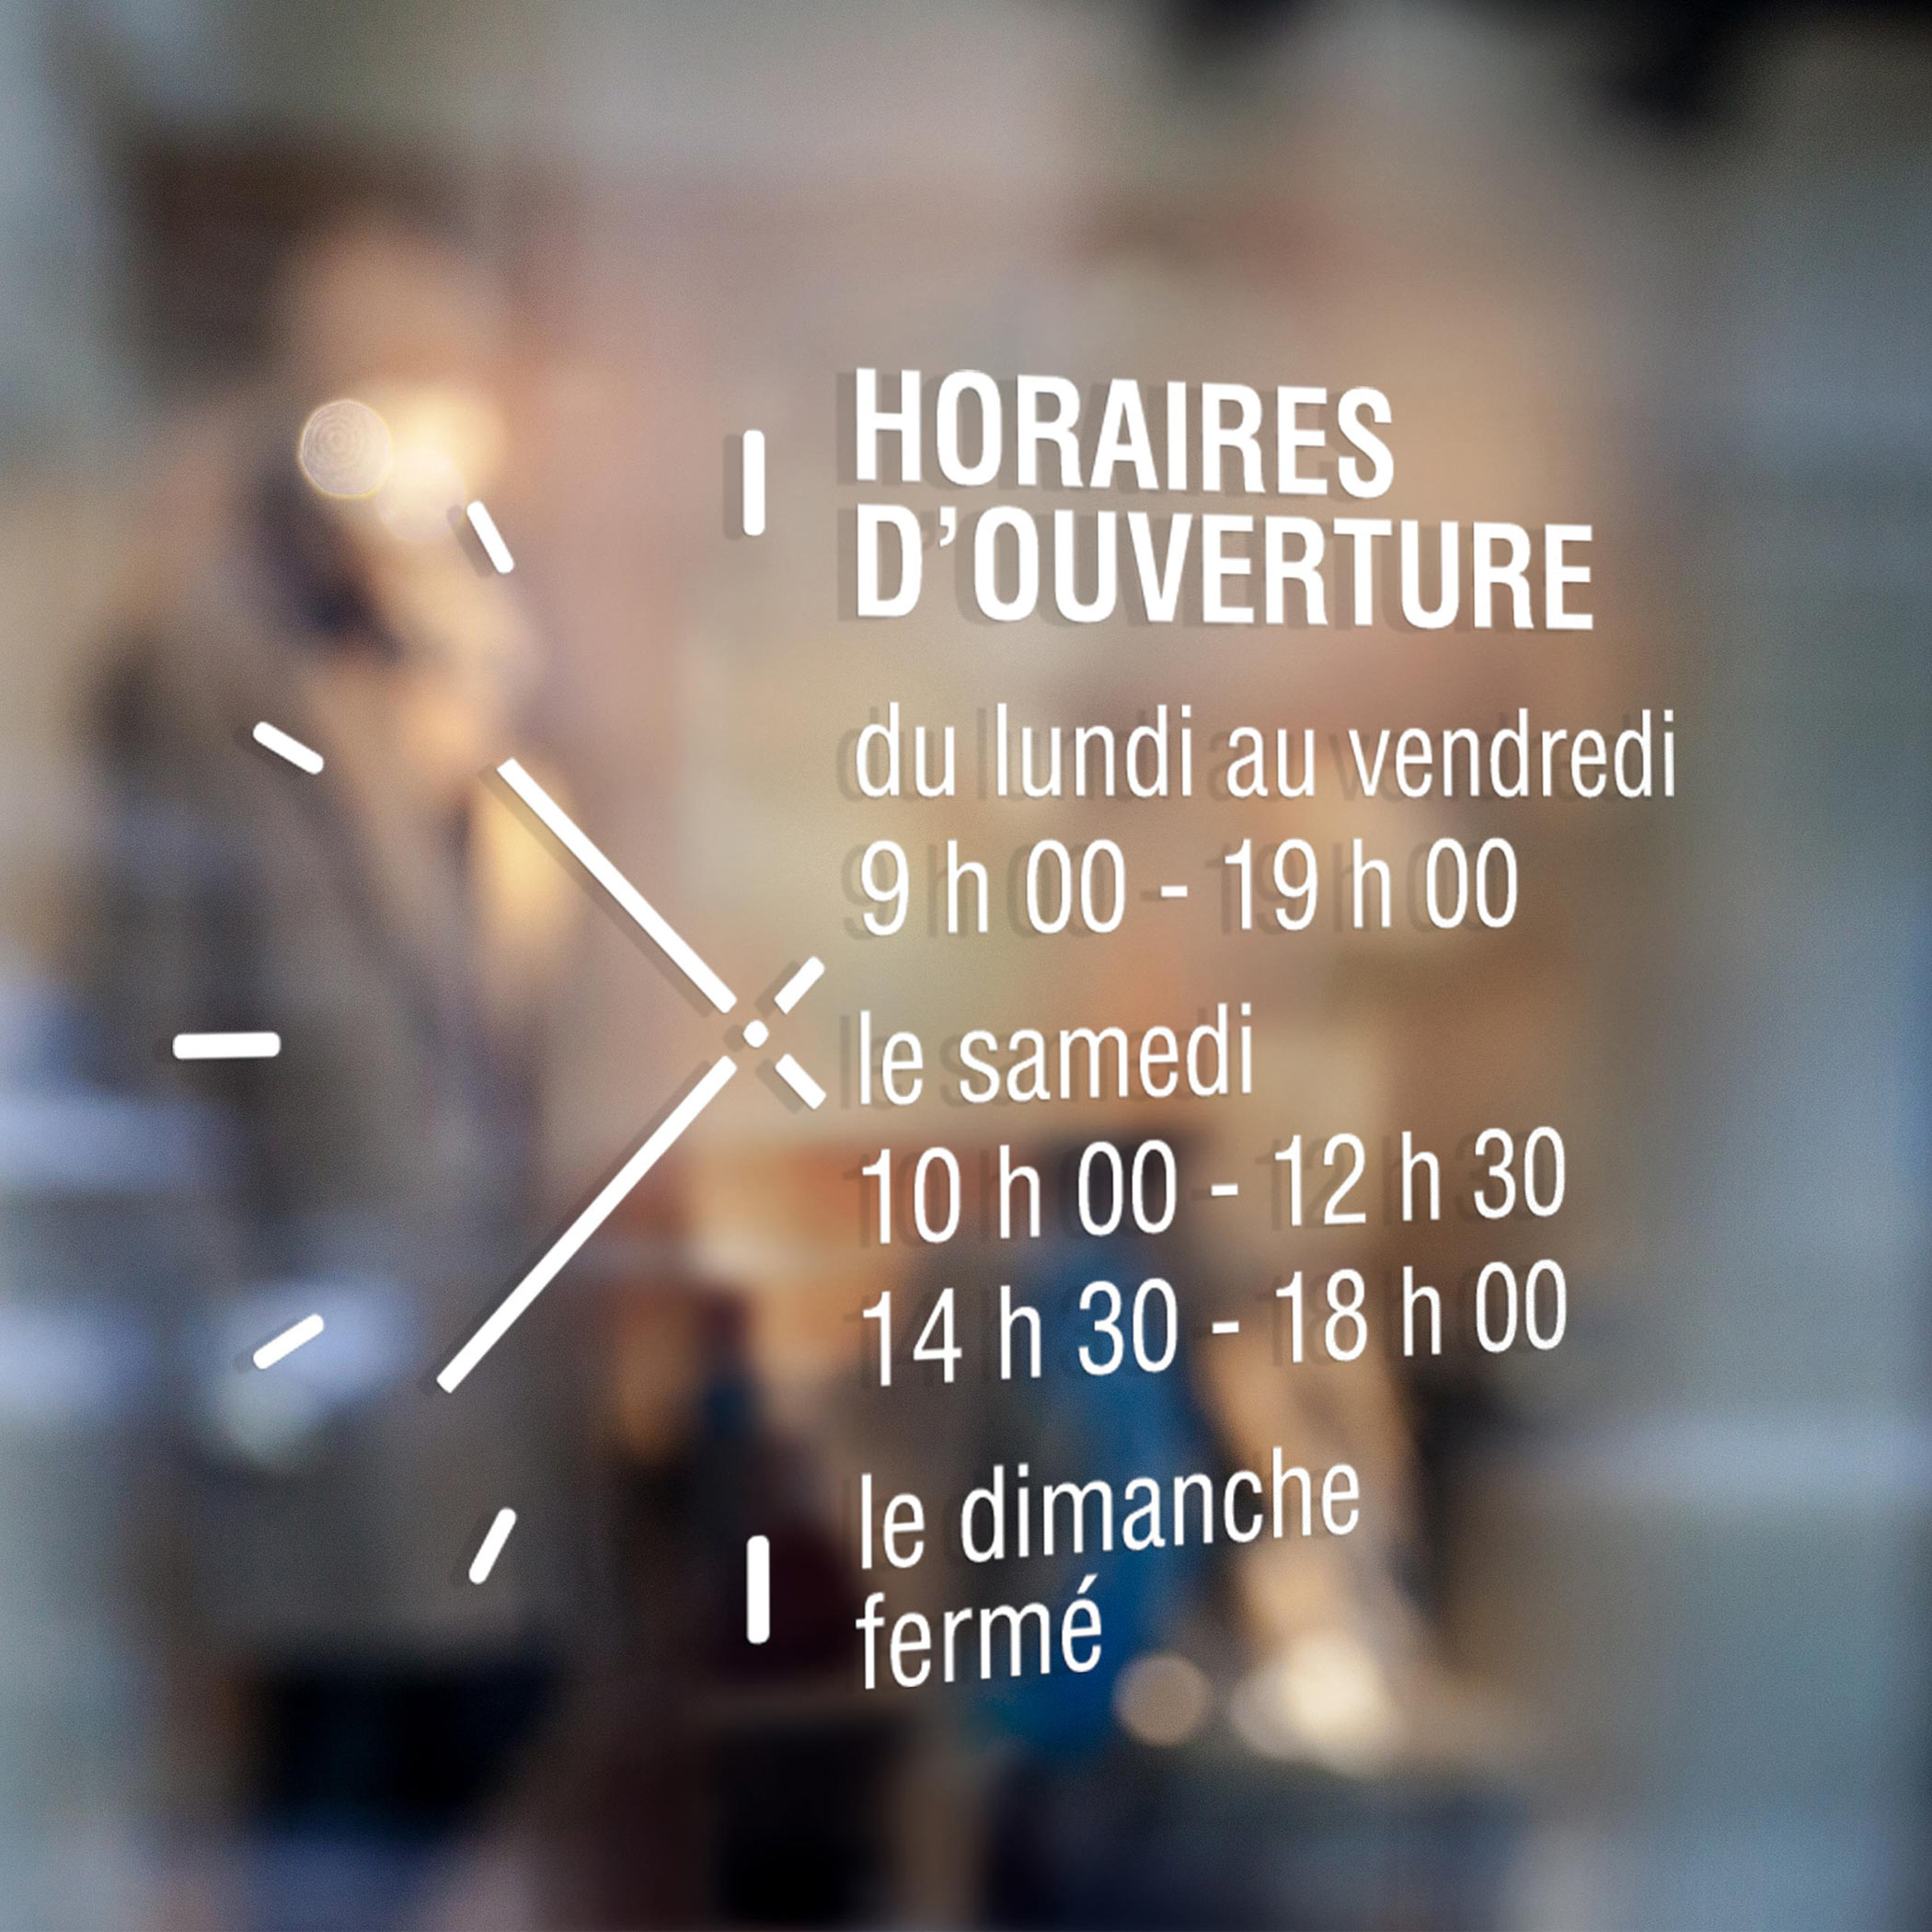 Création stickers vitrines horaires ouverture